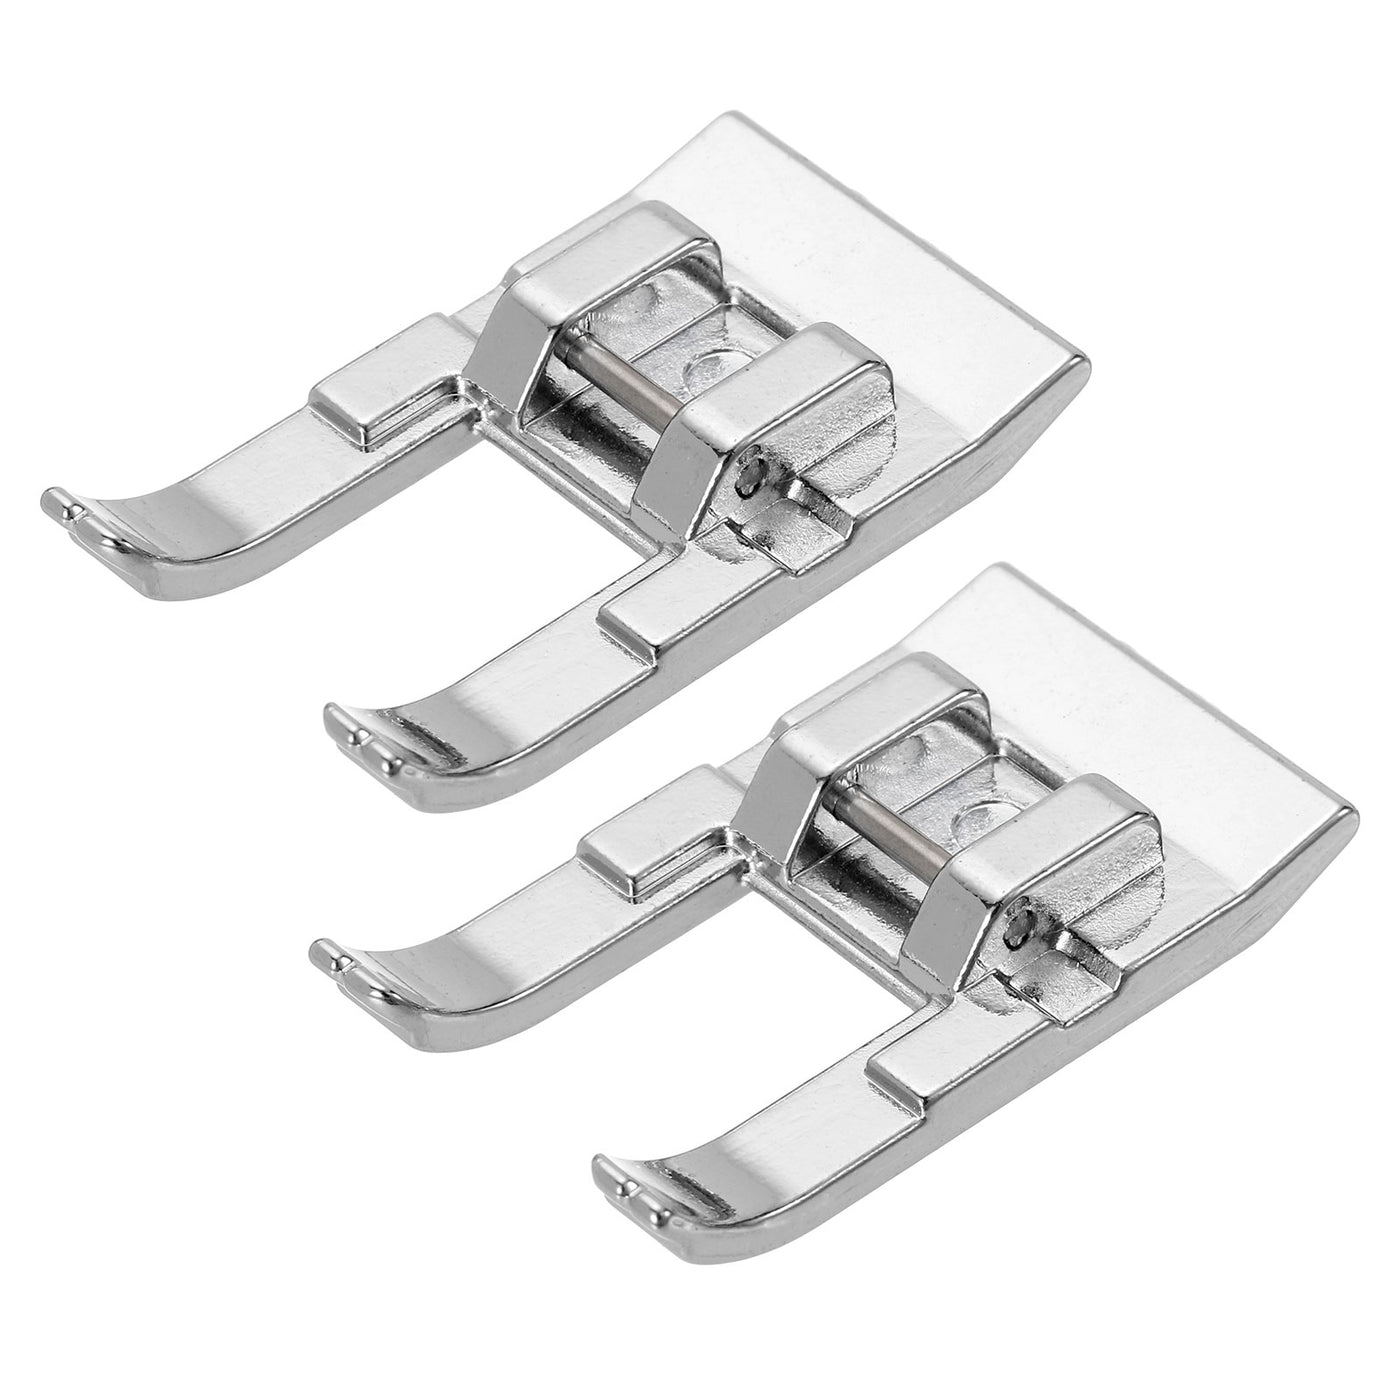 uxcell Uxcell Open Toe Foot Sewing Machine Foot Galvanized Iron Presser Foot 34.5x20mm, 2Pcs